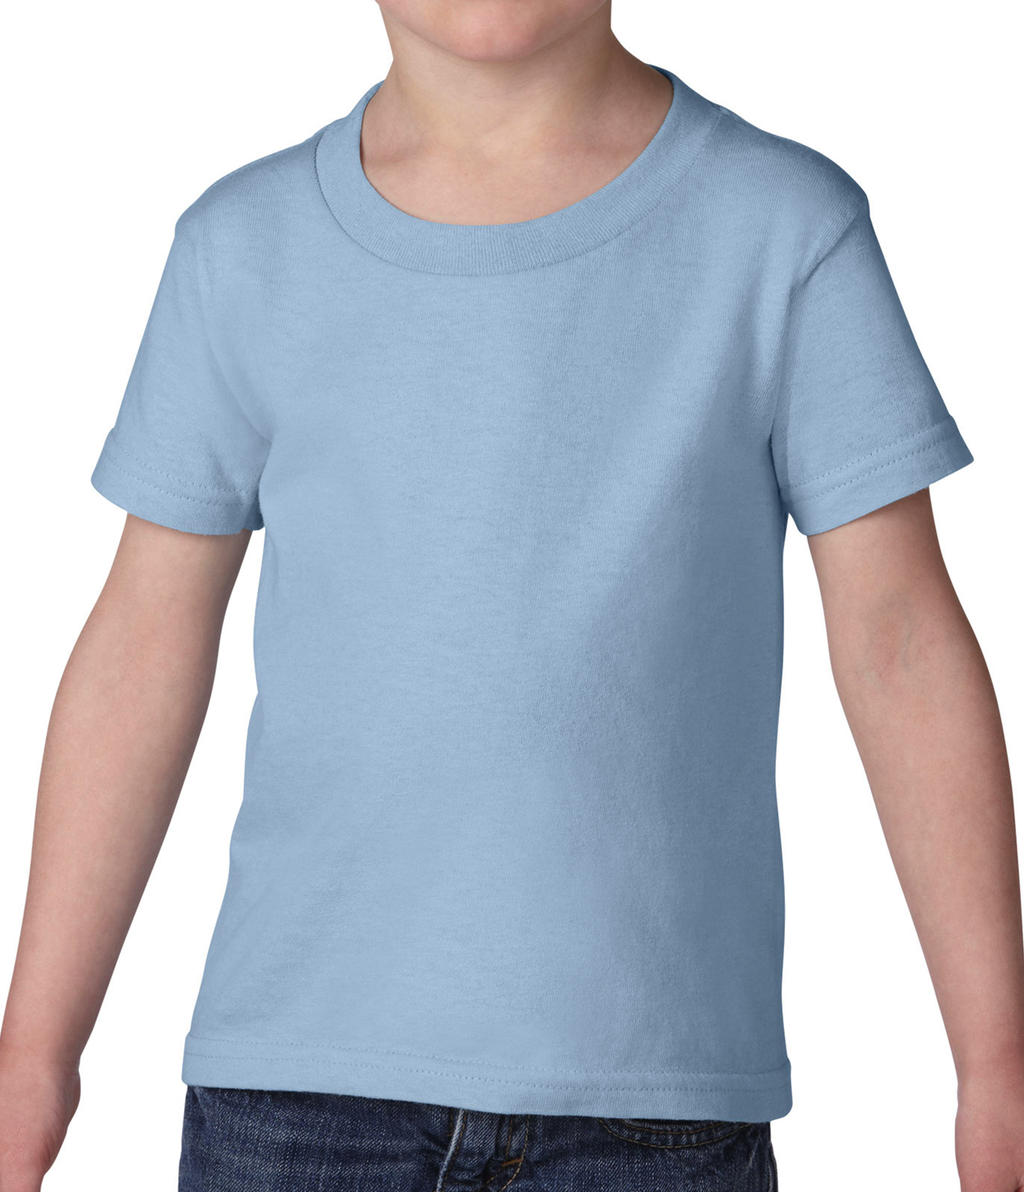  Heavy Cotton Toddler T-Shirt in Farbe Light Blue